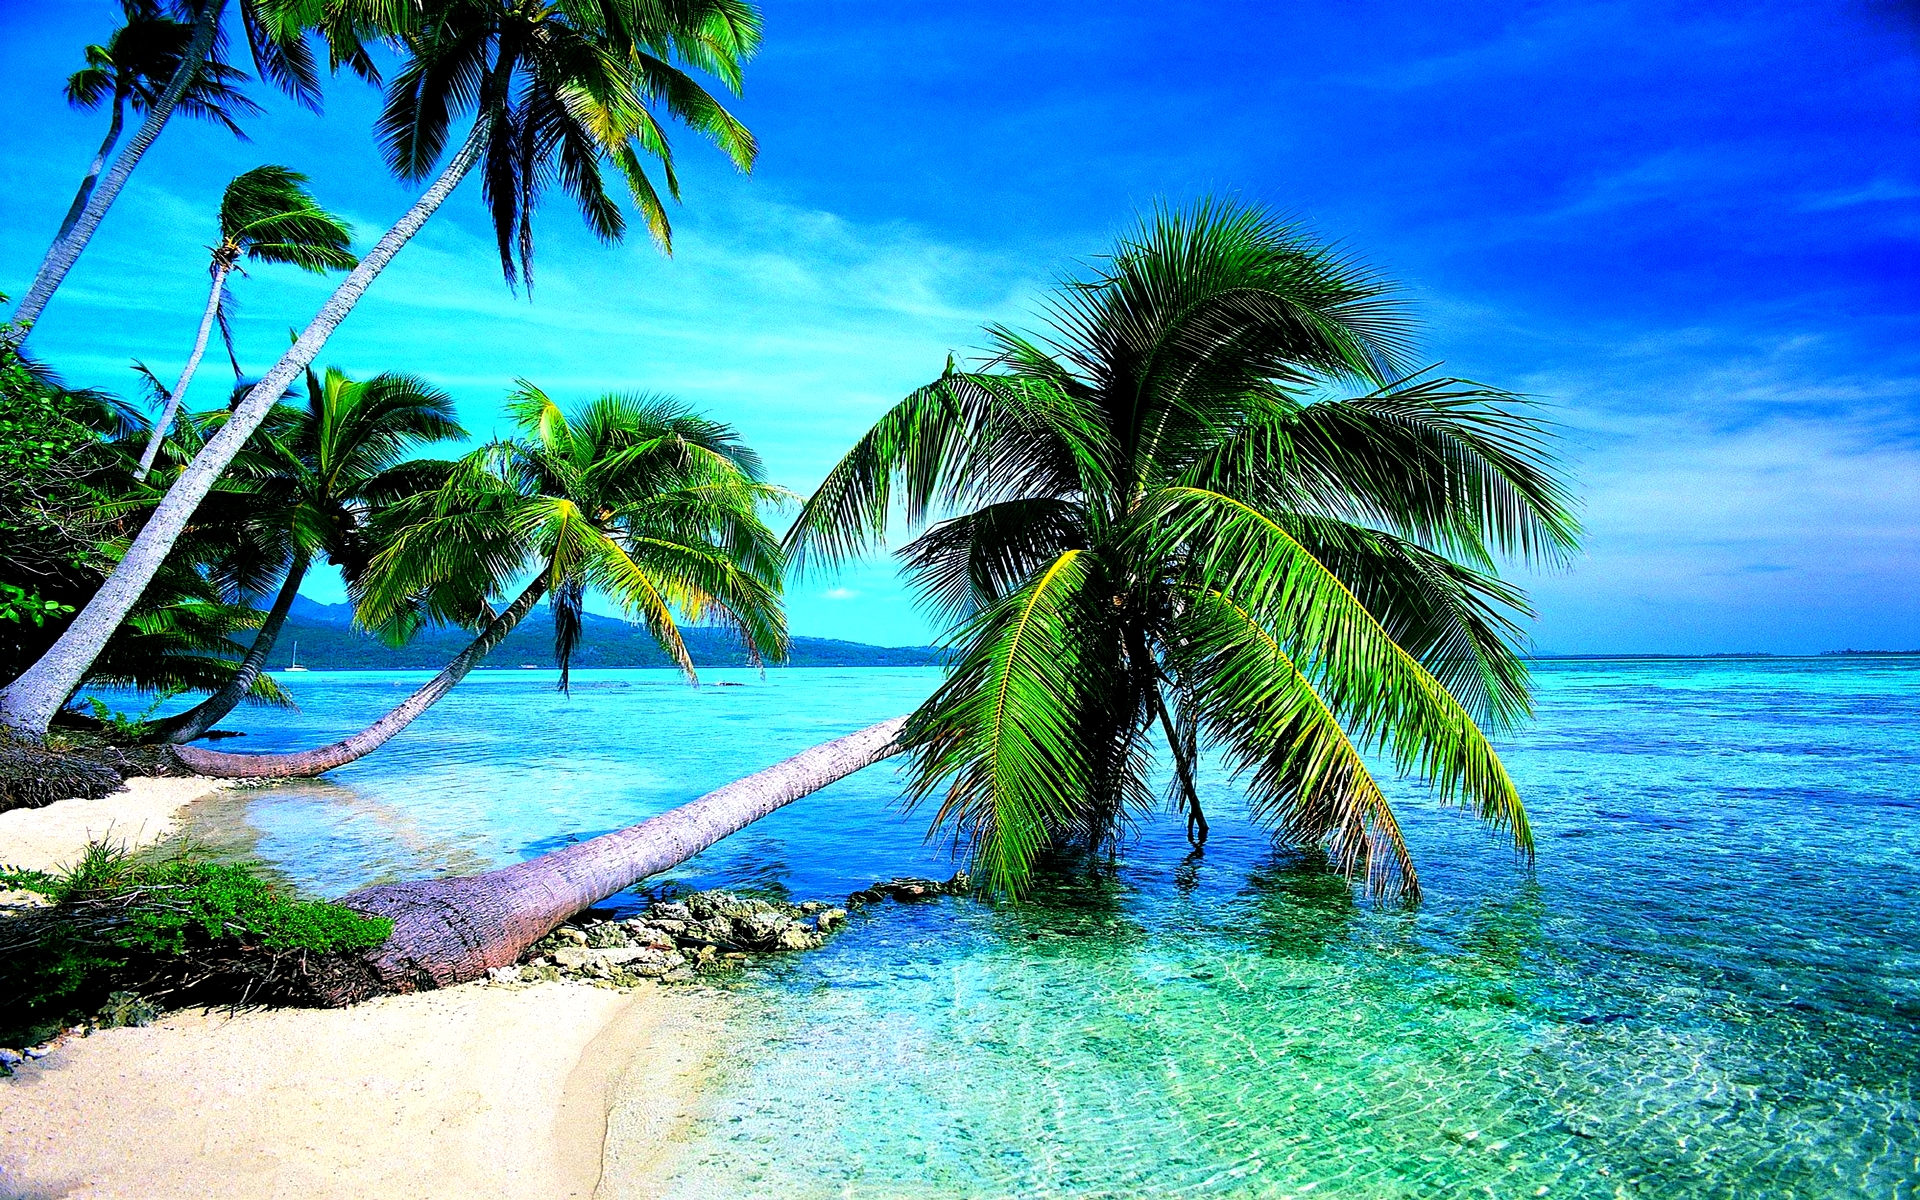 Tropical Beach HD Wallpaper And Image For Your Phone Secreen